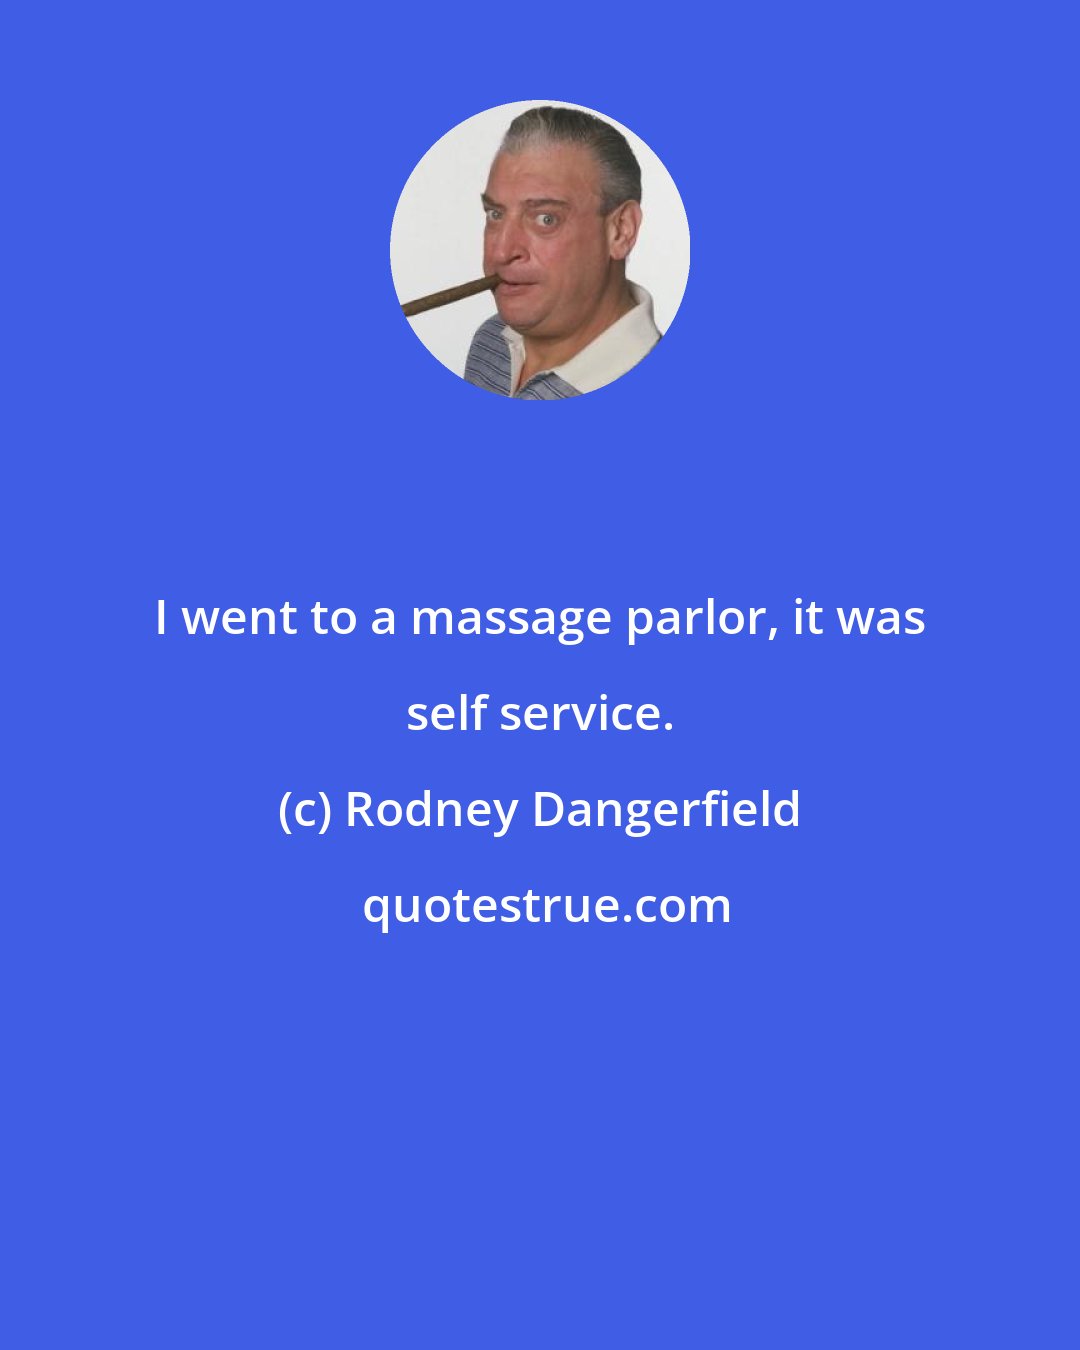 Rodney Dangerfield: I went to a massage parlor, it was self service.